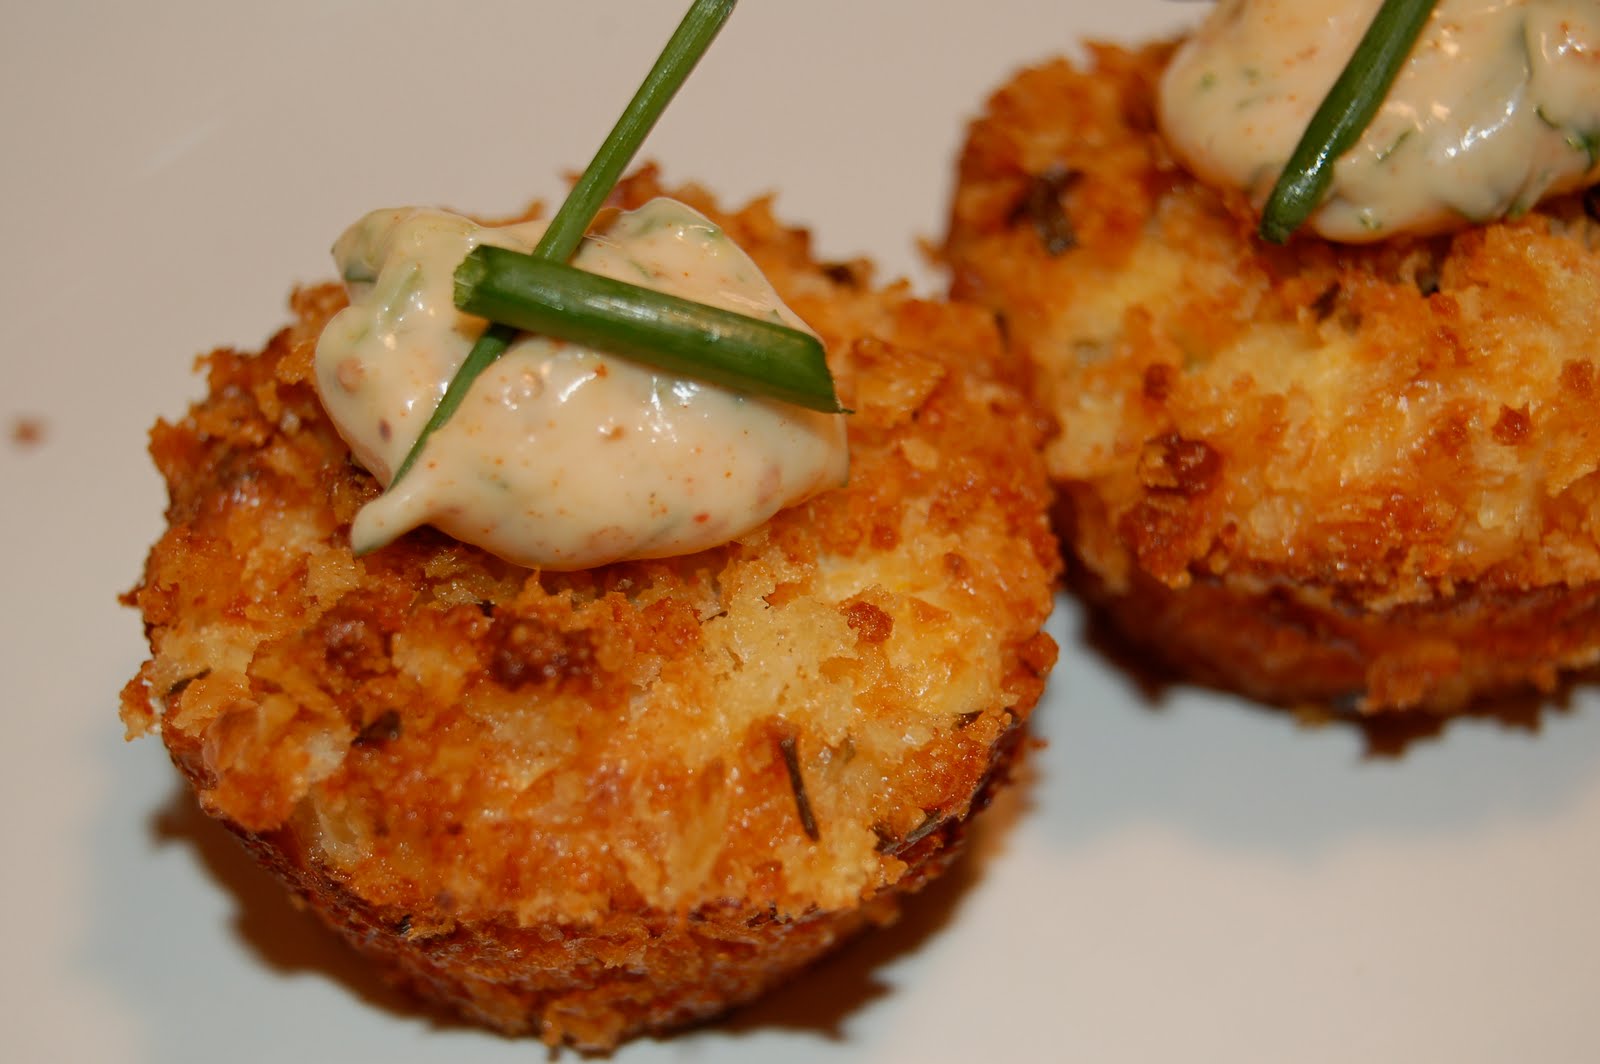 5 Photos of Mini Crab Cakes With Remoulade Sauce